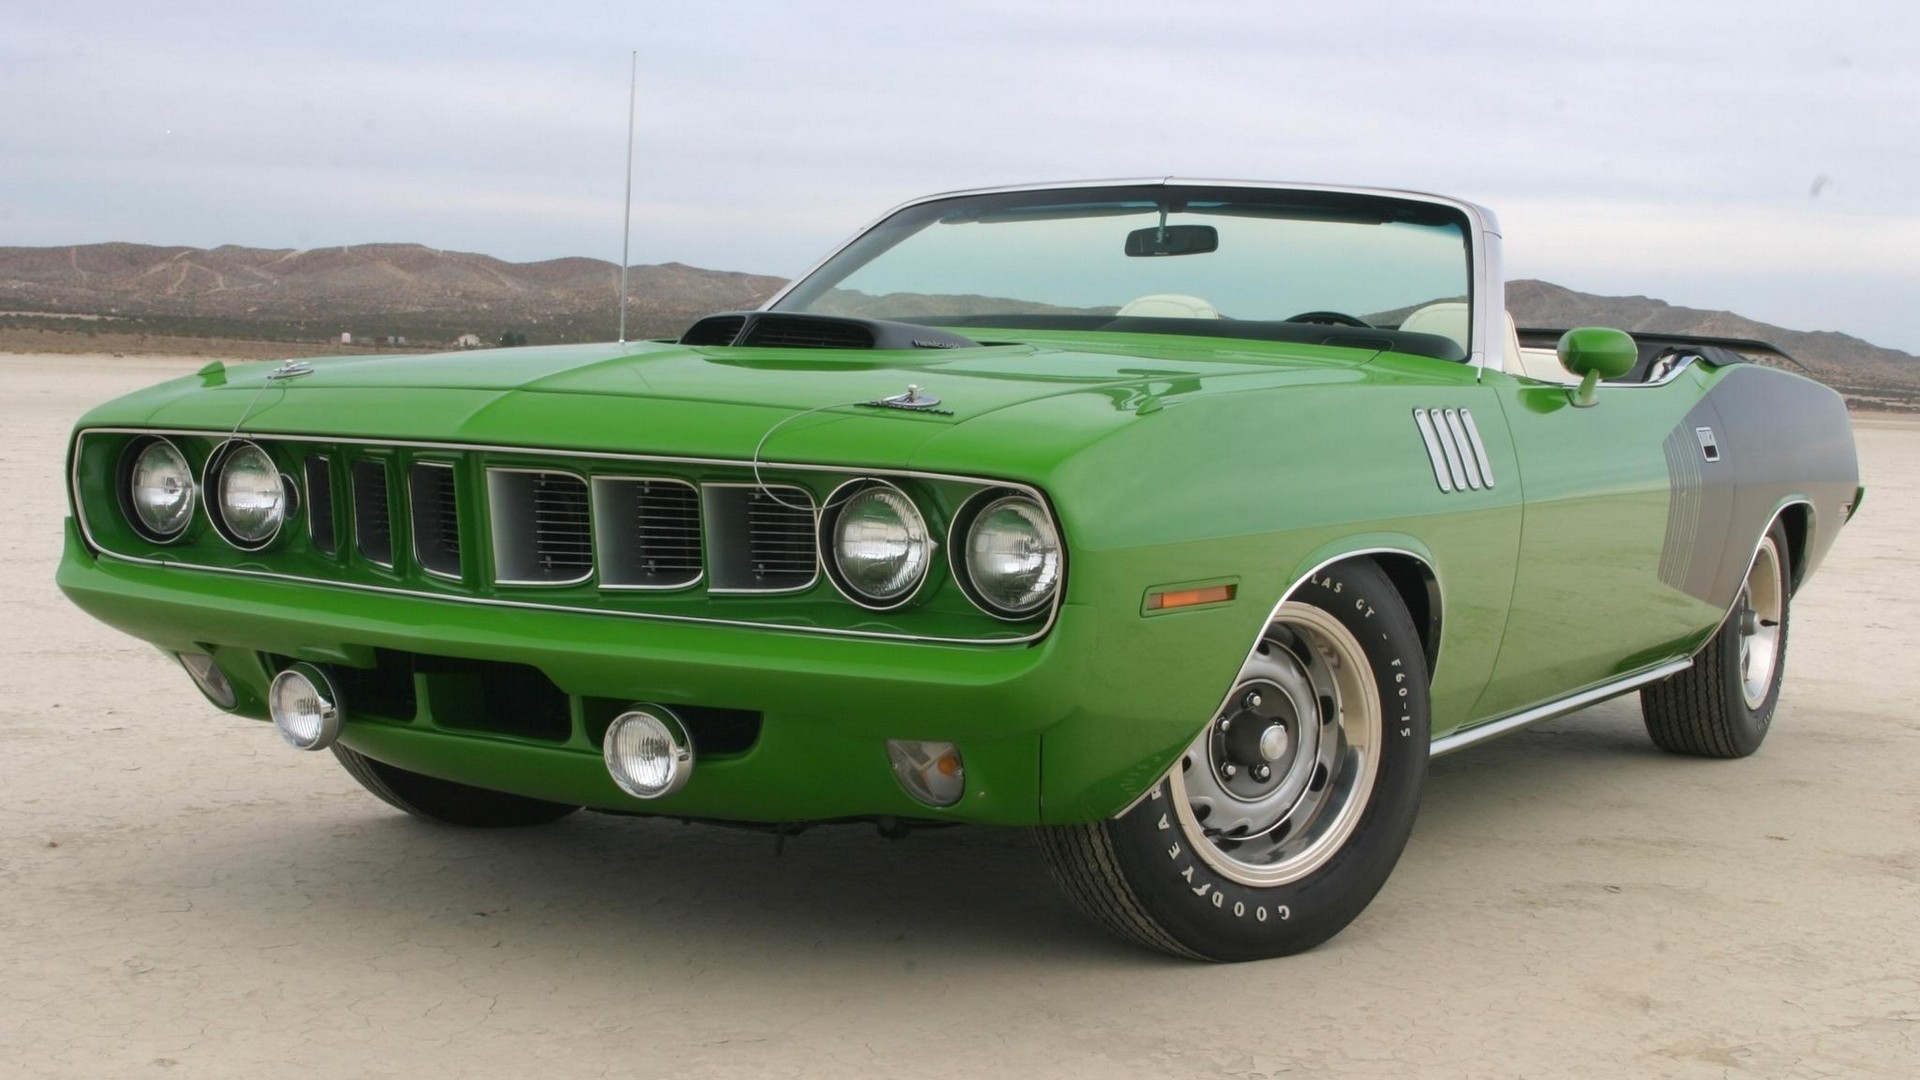 General 1920x1080 green cars car vehicle Plymouth Barracuda Plymouth muscle cars American cars convertible